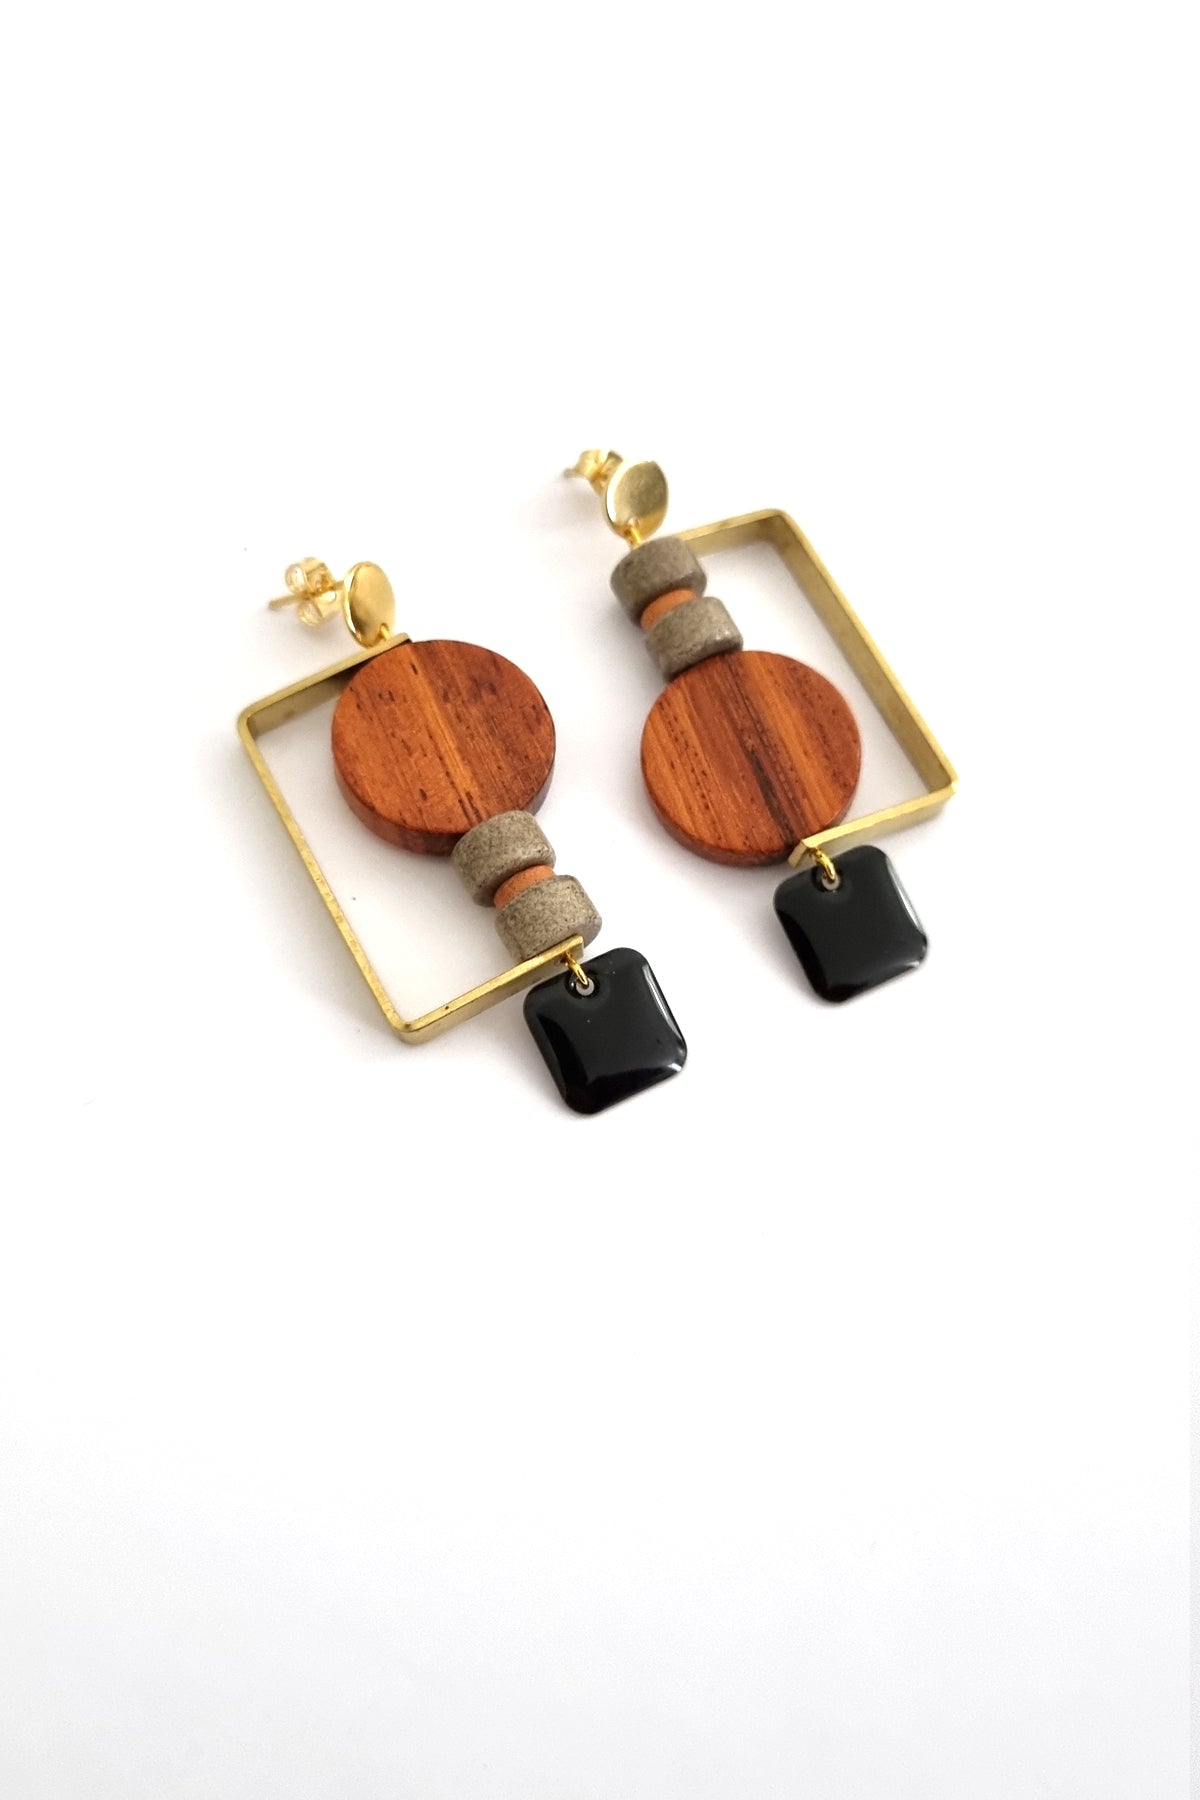 A pair of stud dangle earrings lay against a white background. They feature a half square brass shape that envelopes a circular wooden bead, and two grey stone beads separated by a small wooden bead. The design is flipped in each ear and a black square enamel dangle hangs from the bottom on each earring.